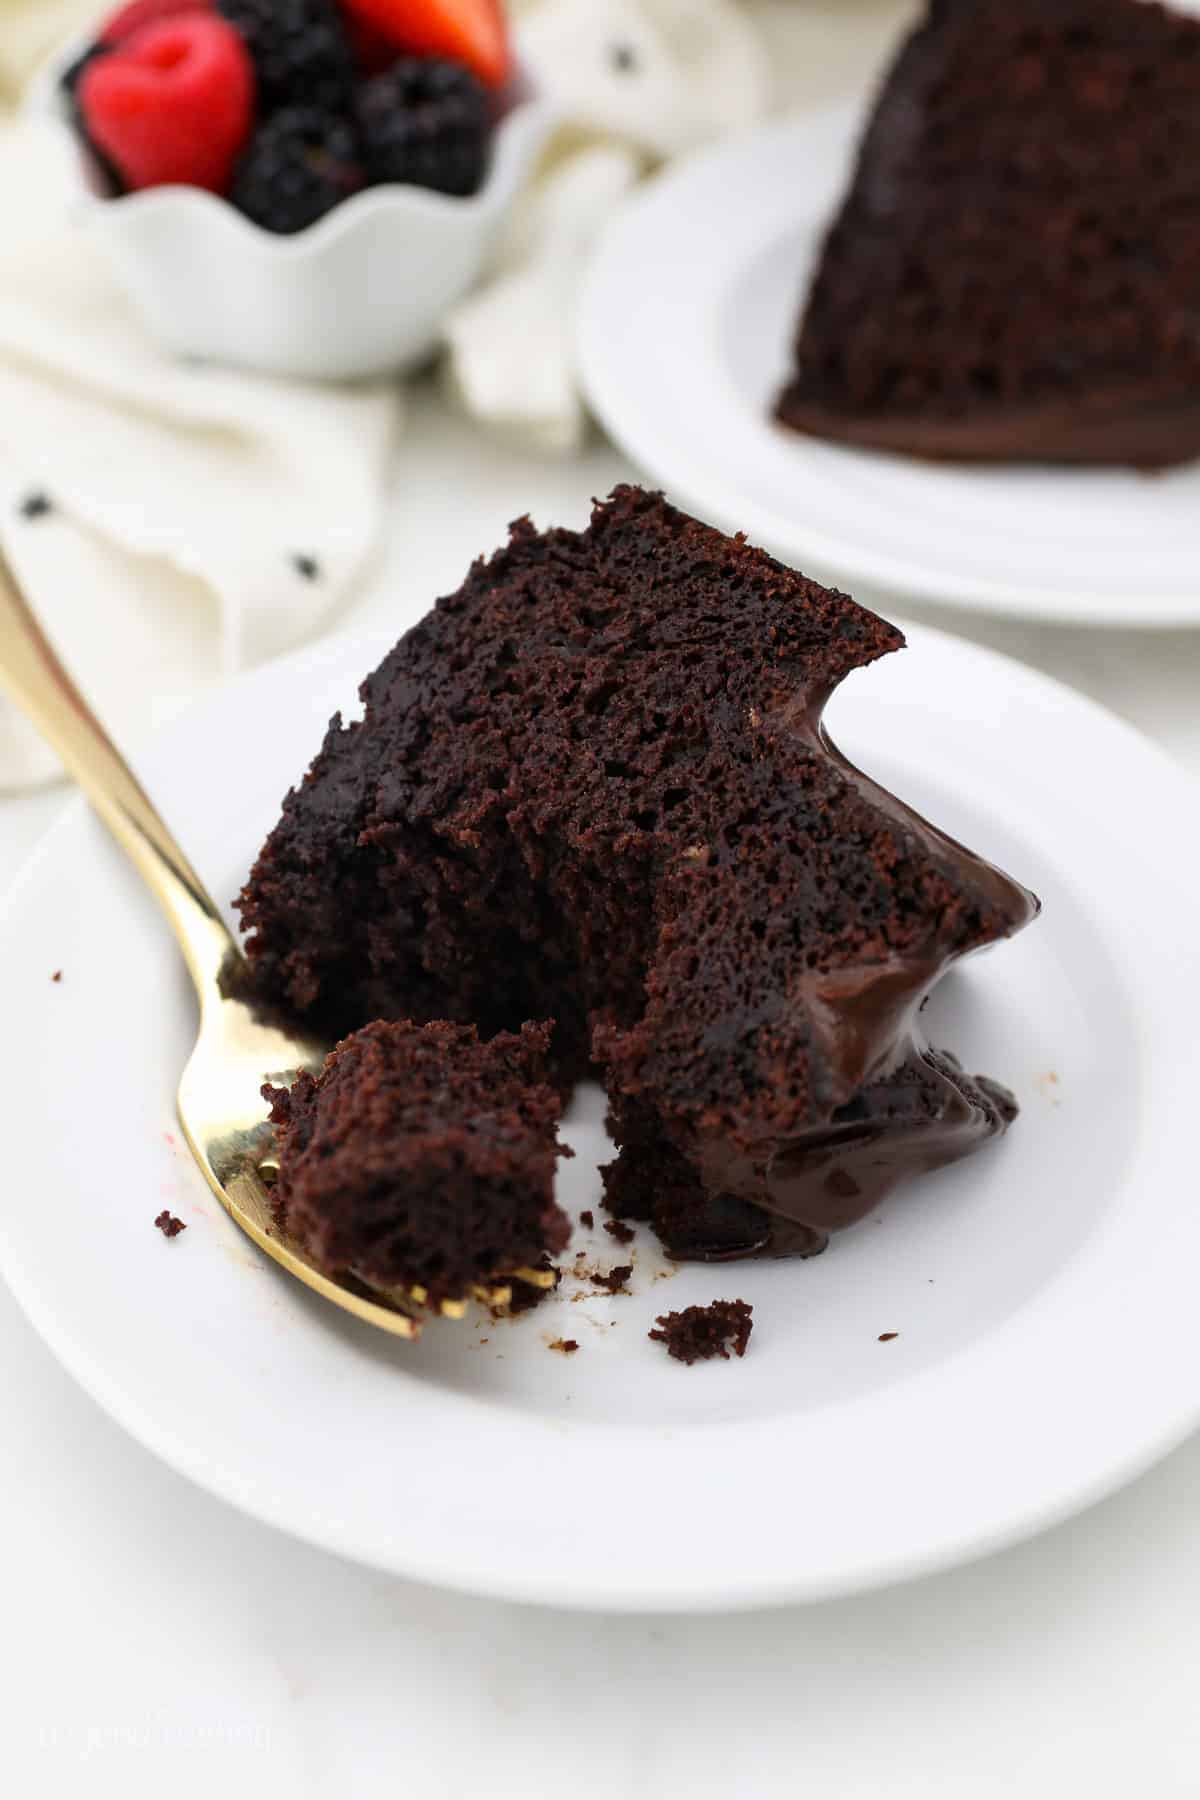 A forkful of chocolate bundt cake resting next to a slice of cake on a white plate.